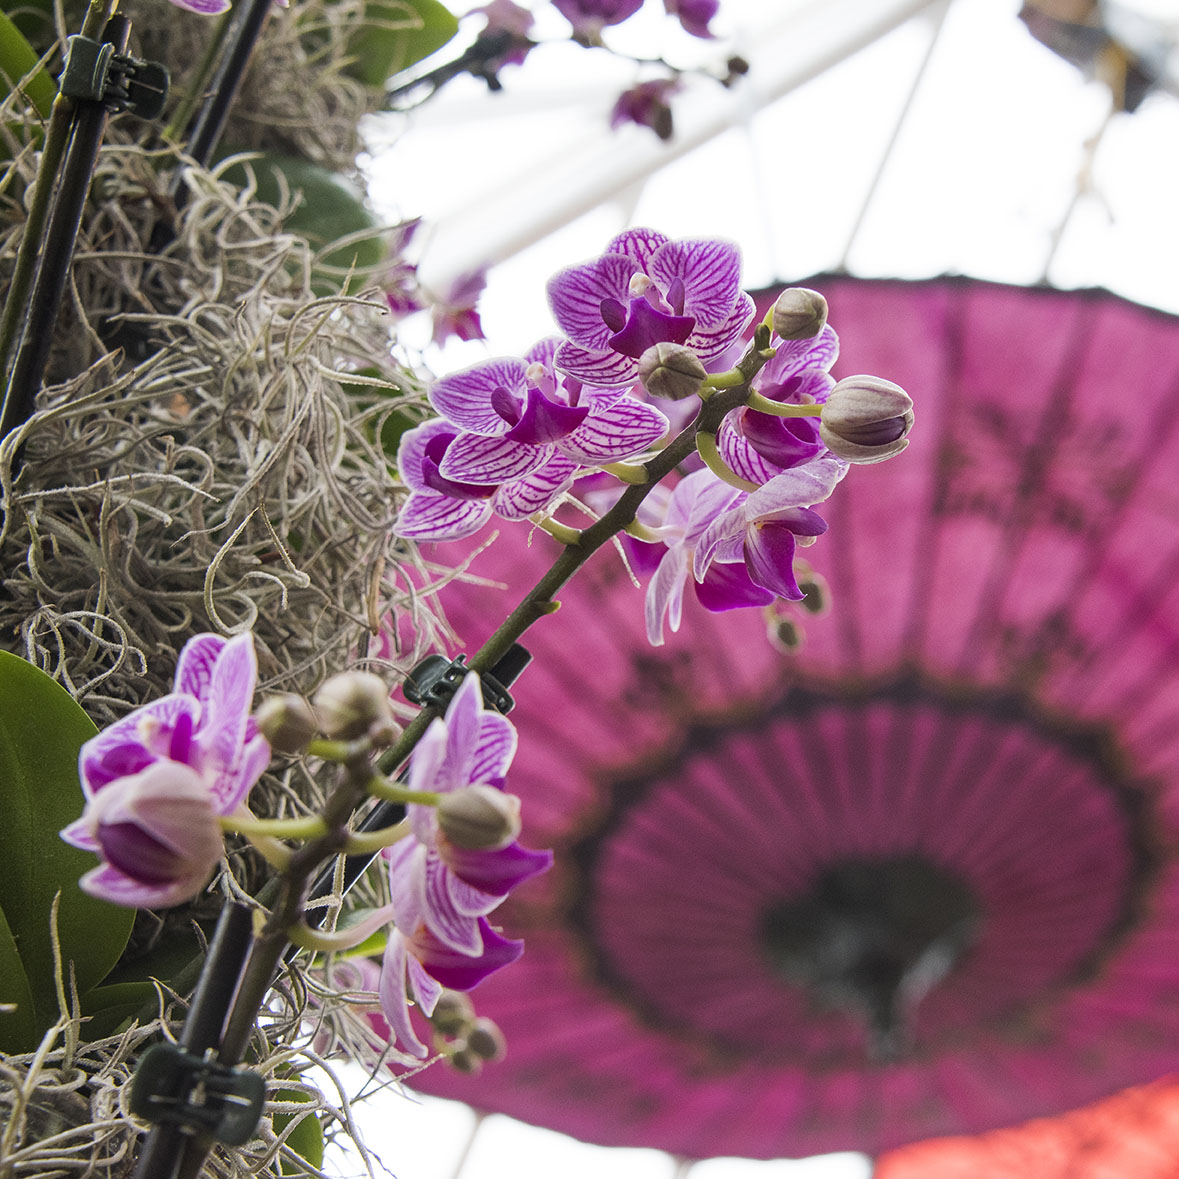 Behind the Scenes at Asia in Bloom: The Orchid Show